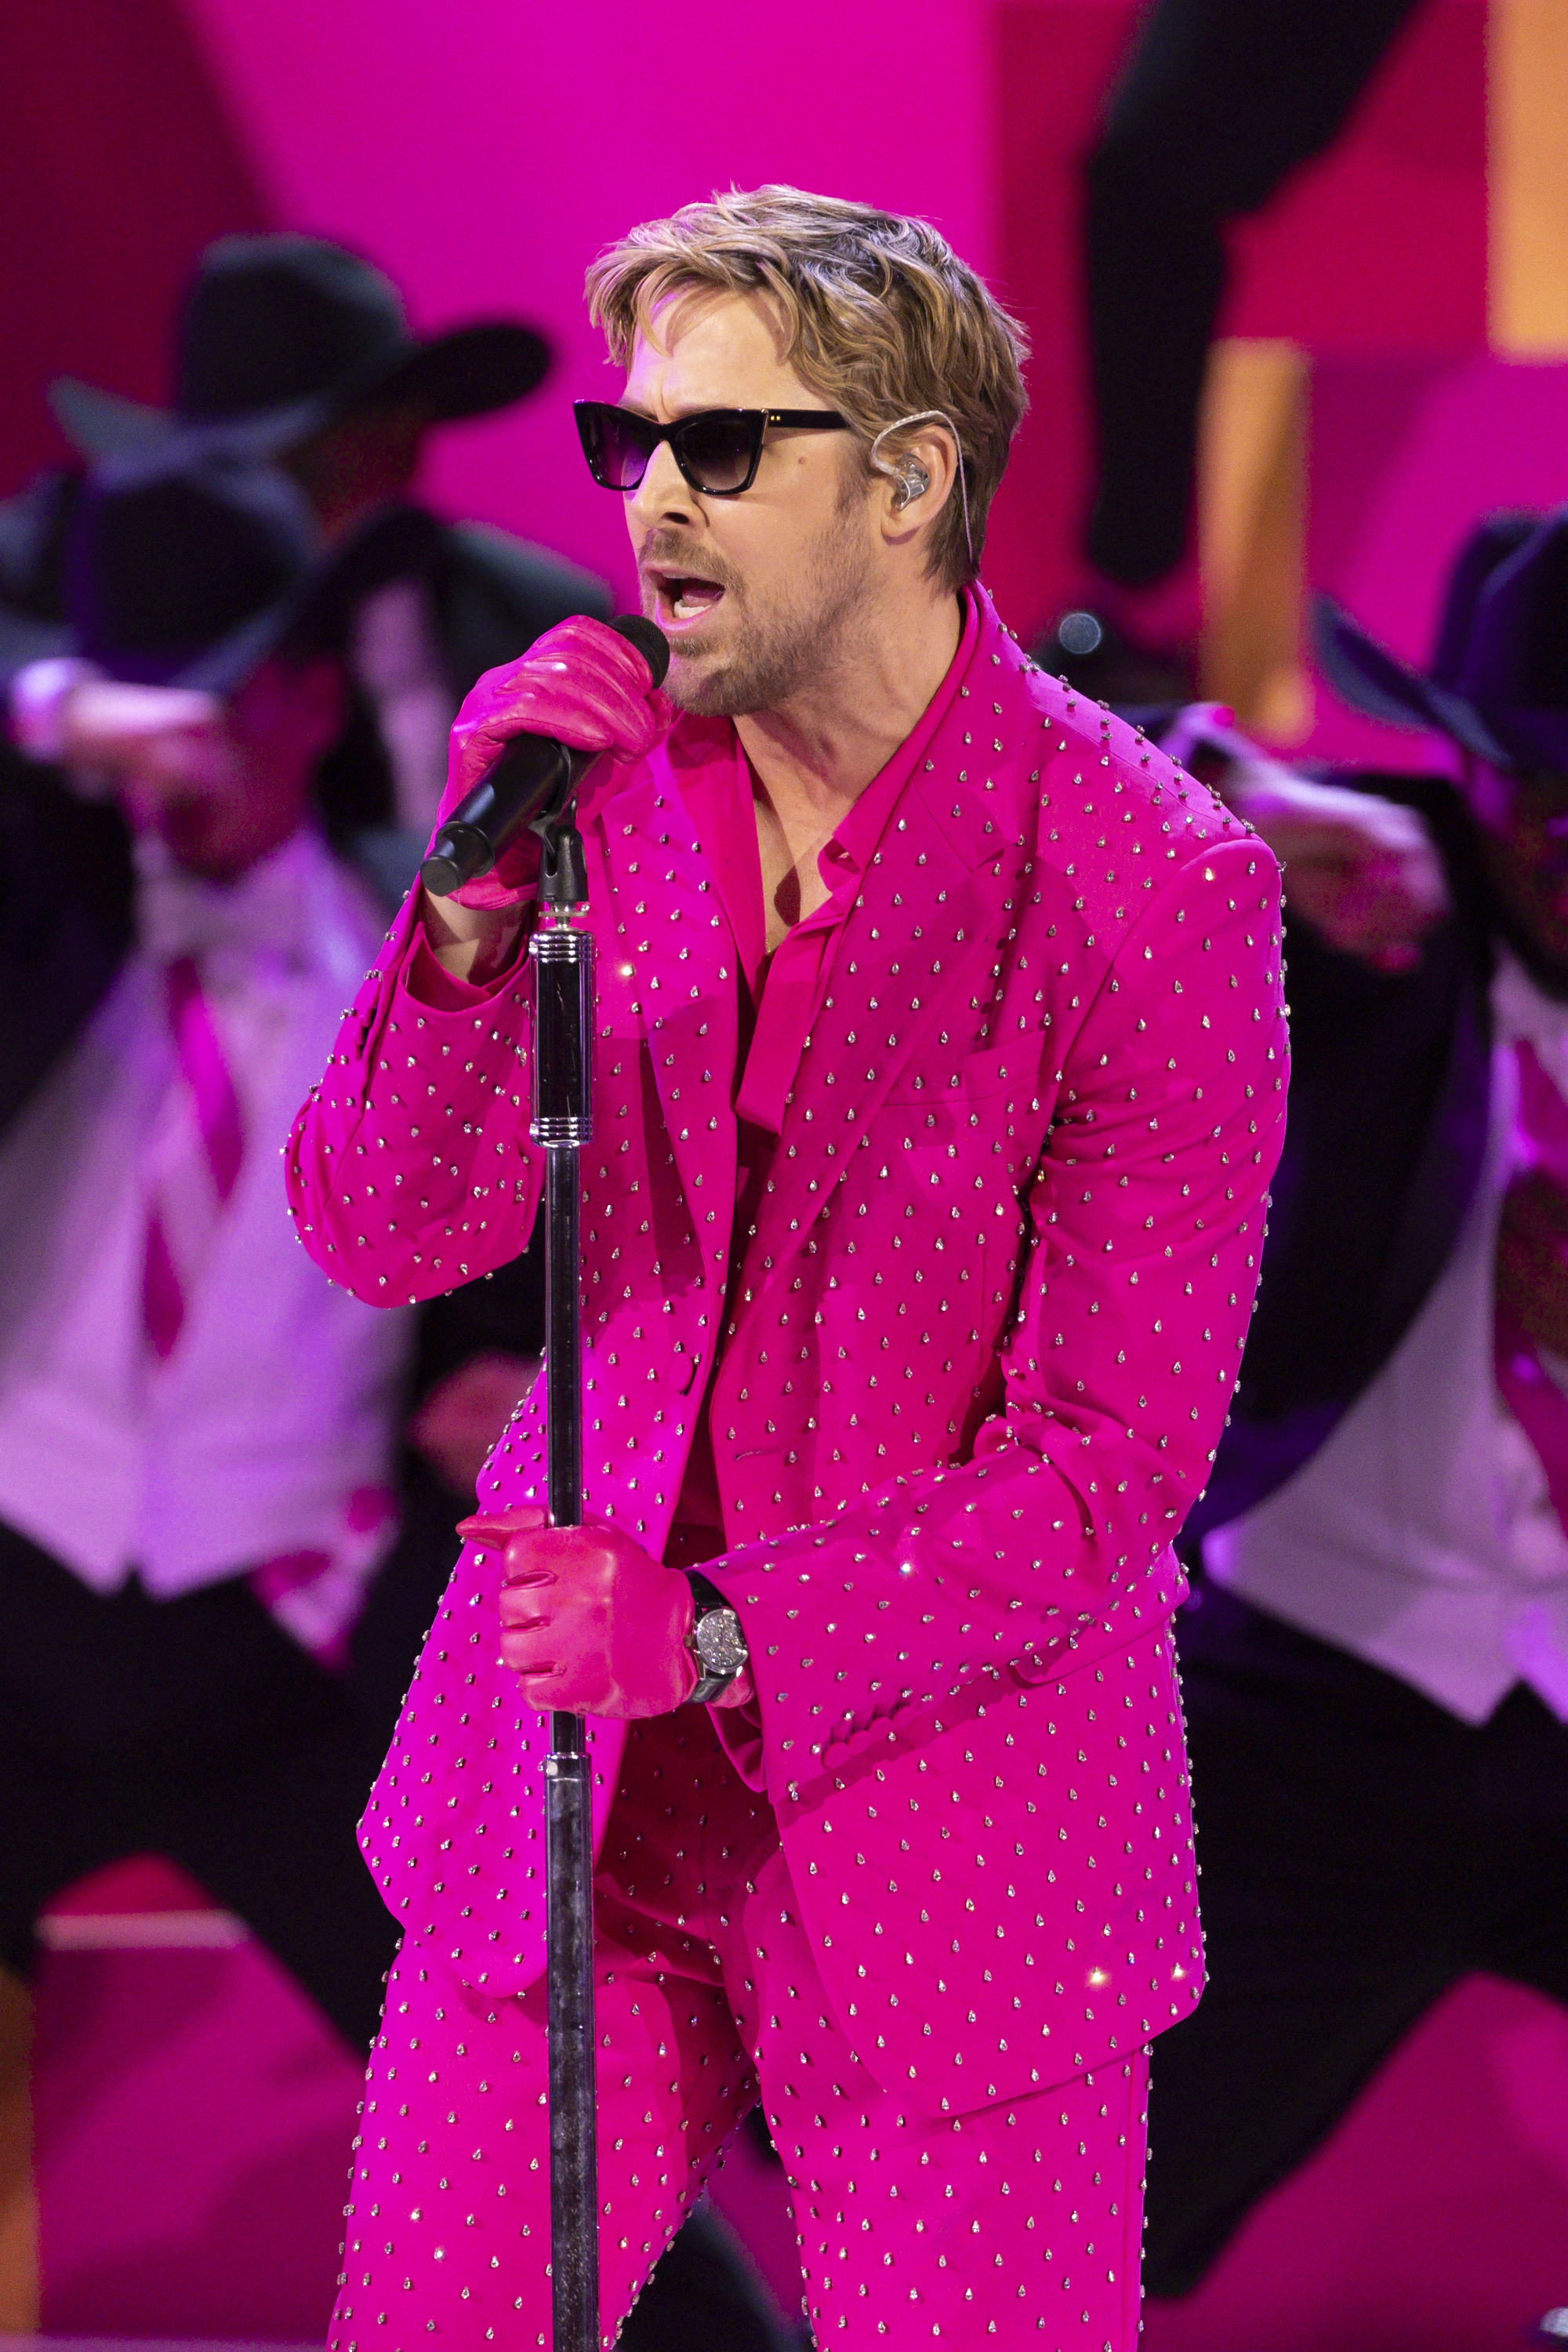 Ryan Gosling performing onstage at the Oscars